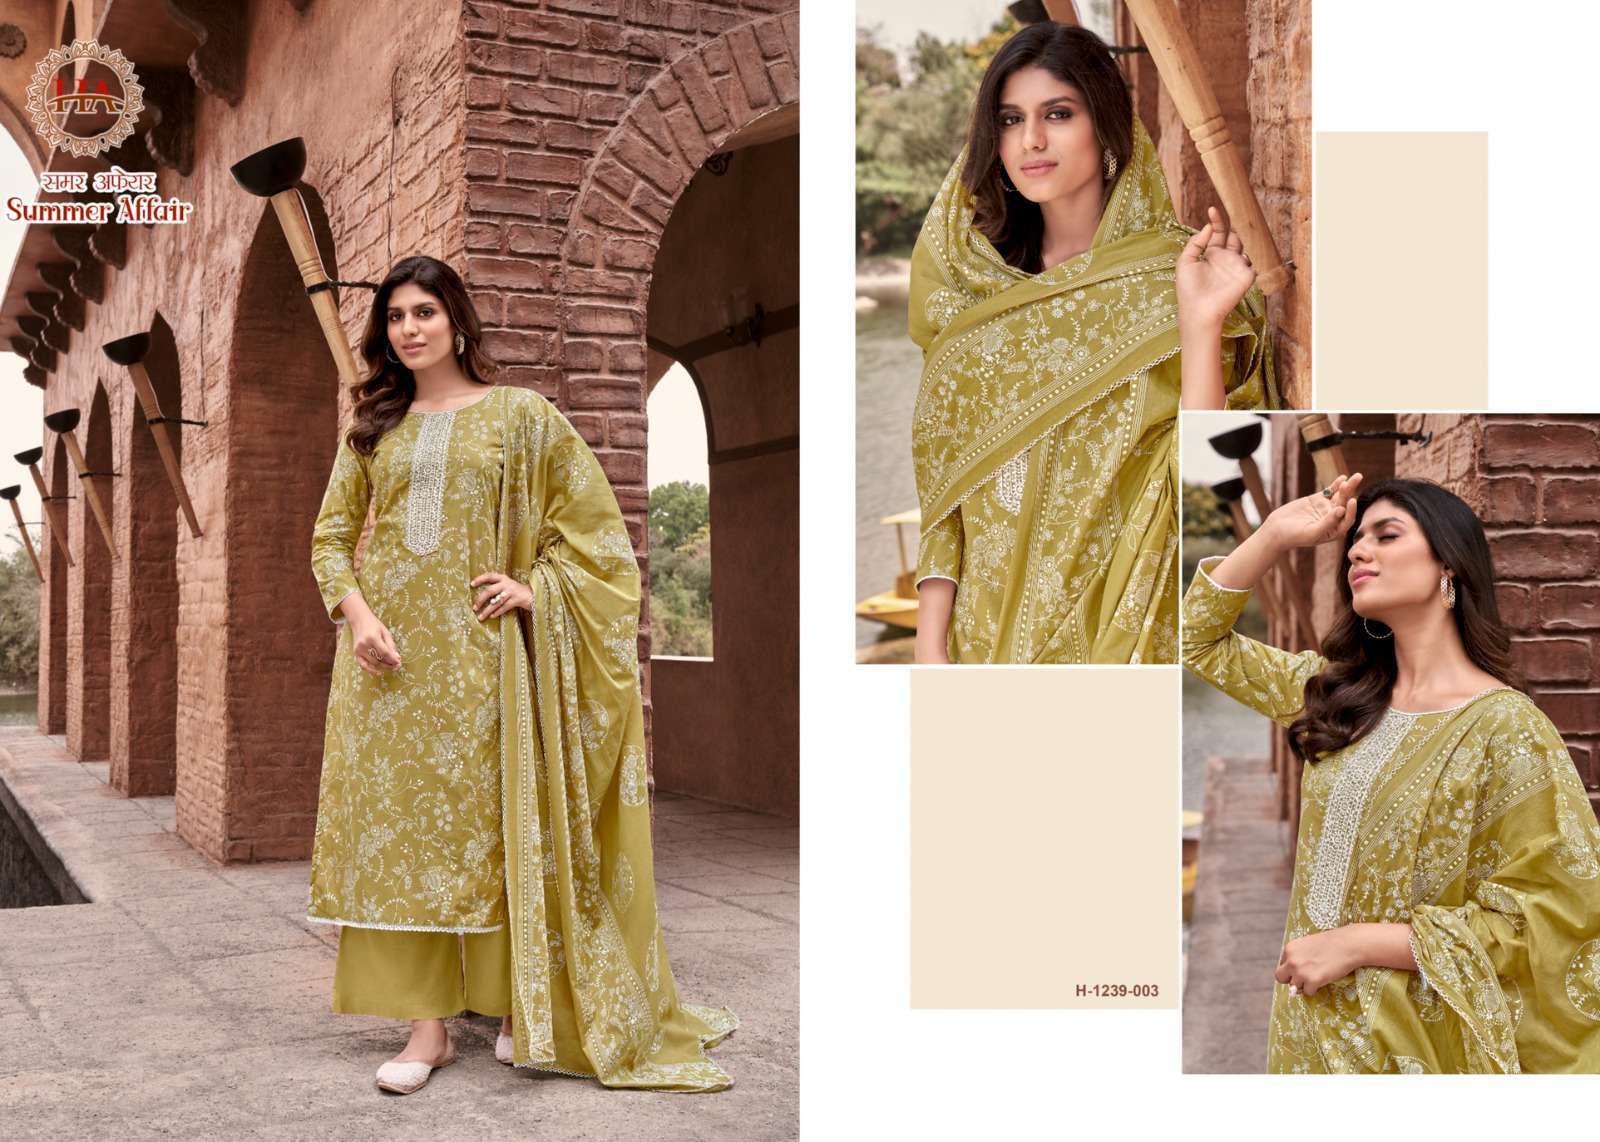 Summer Affair By Harshit Fashion Hub 1239-001 To 1239-008 Series Beautiful Stylish Suits Fancy Colorful Casual Wear & Ethnic Wear & Ready To Wear Pure Cambric Print Dresses At Wholesale Price